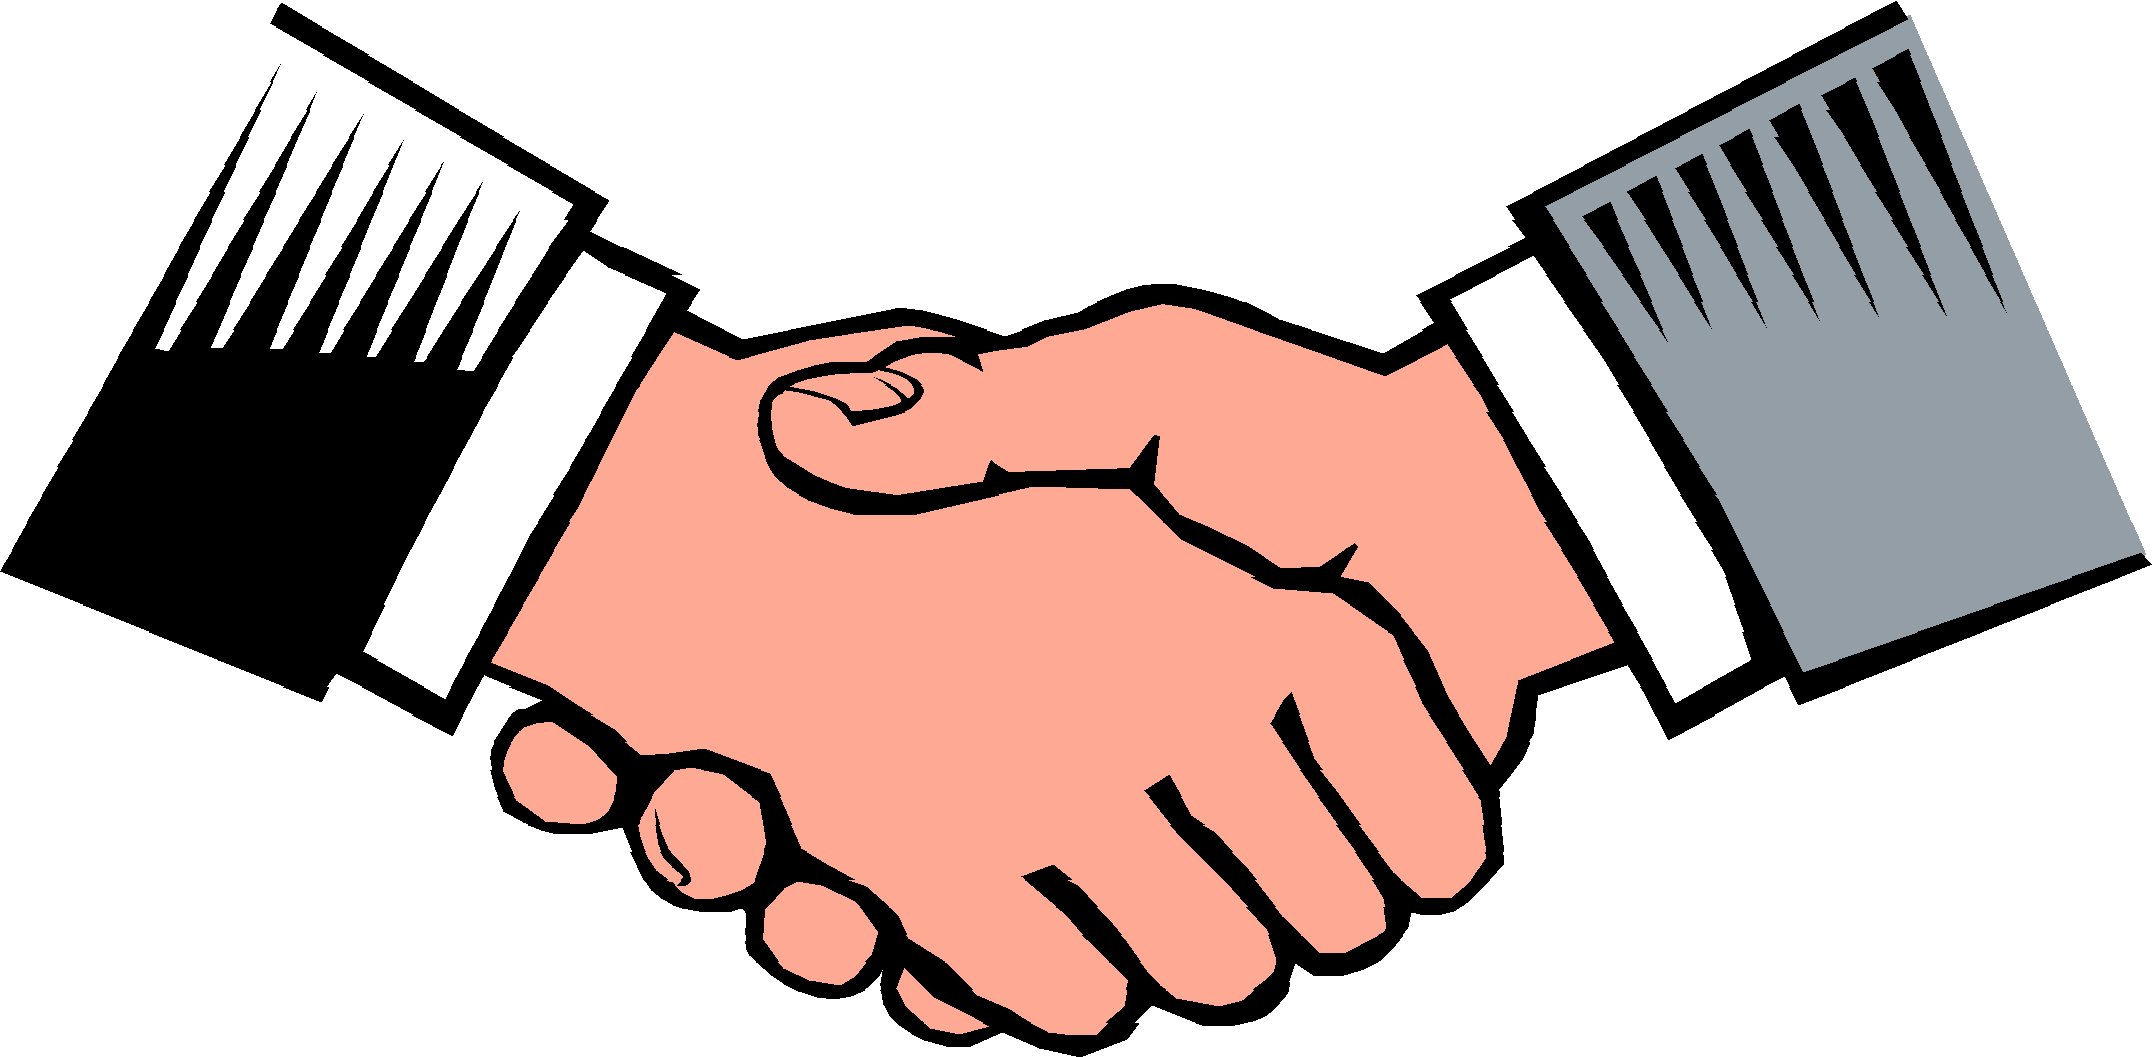 Hands Shaking Picture - Hands Shaking Clipart